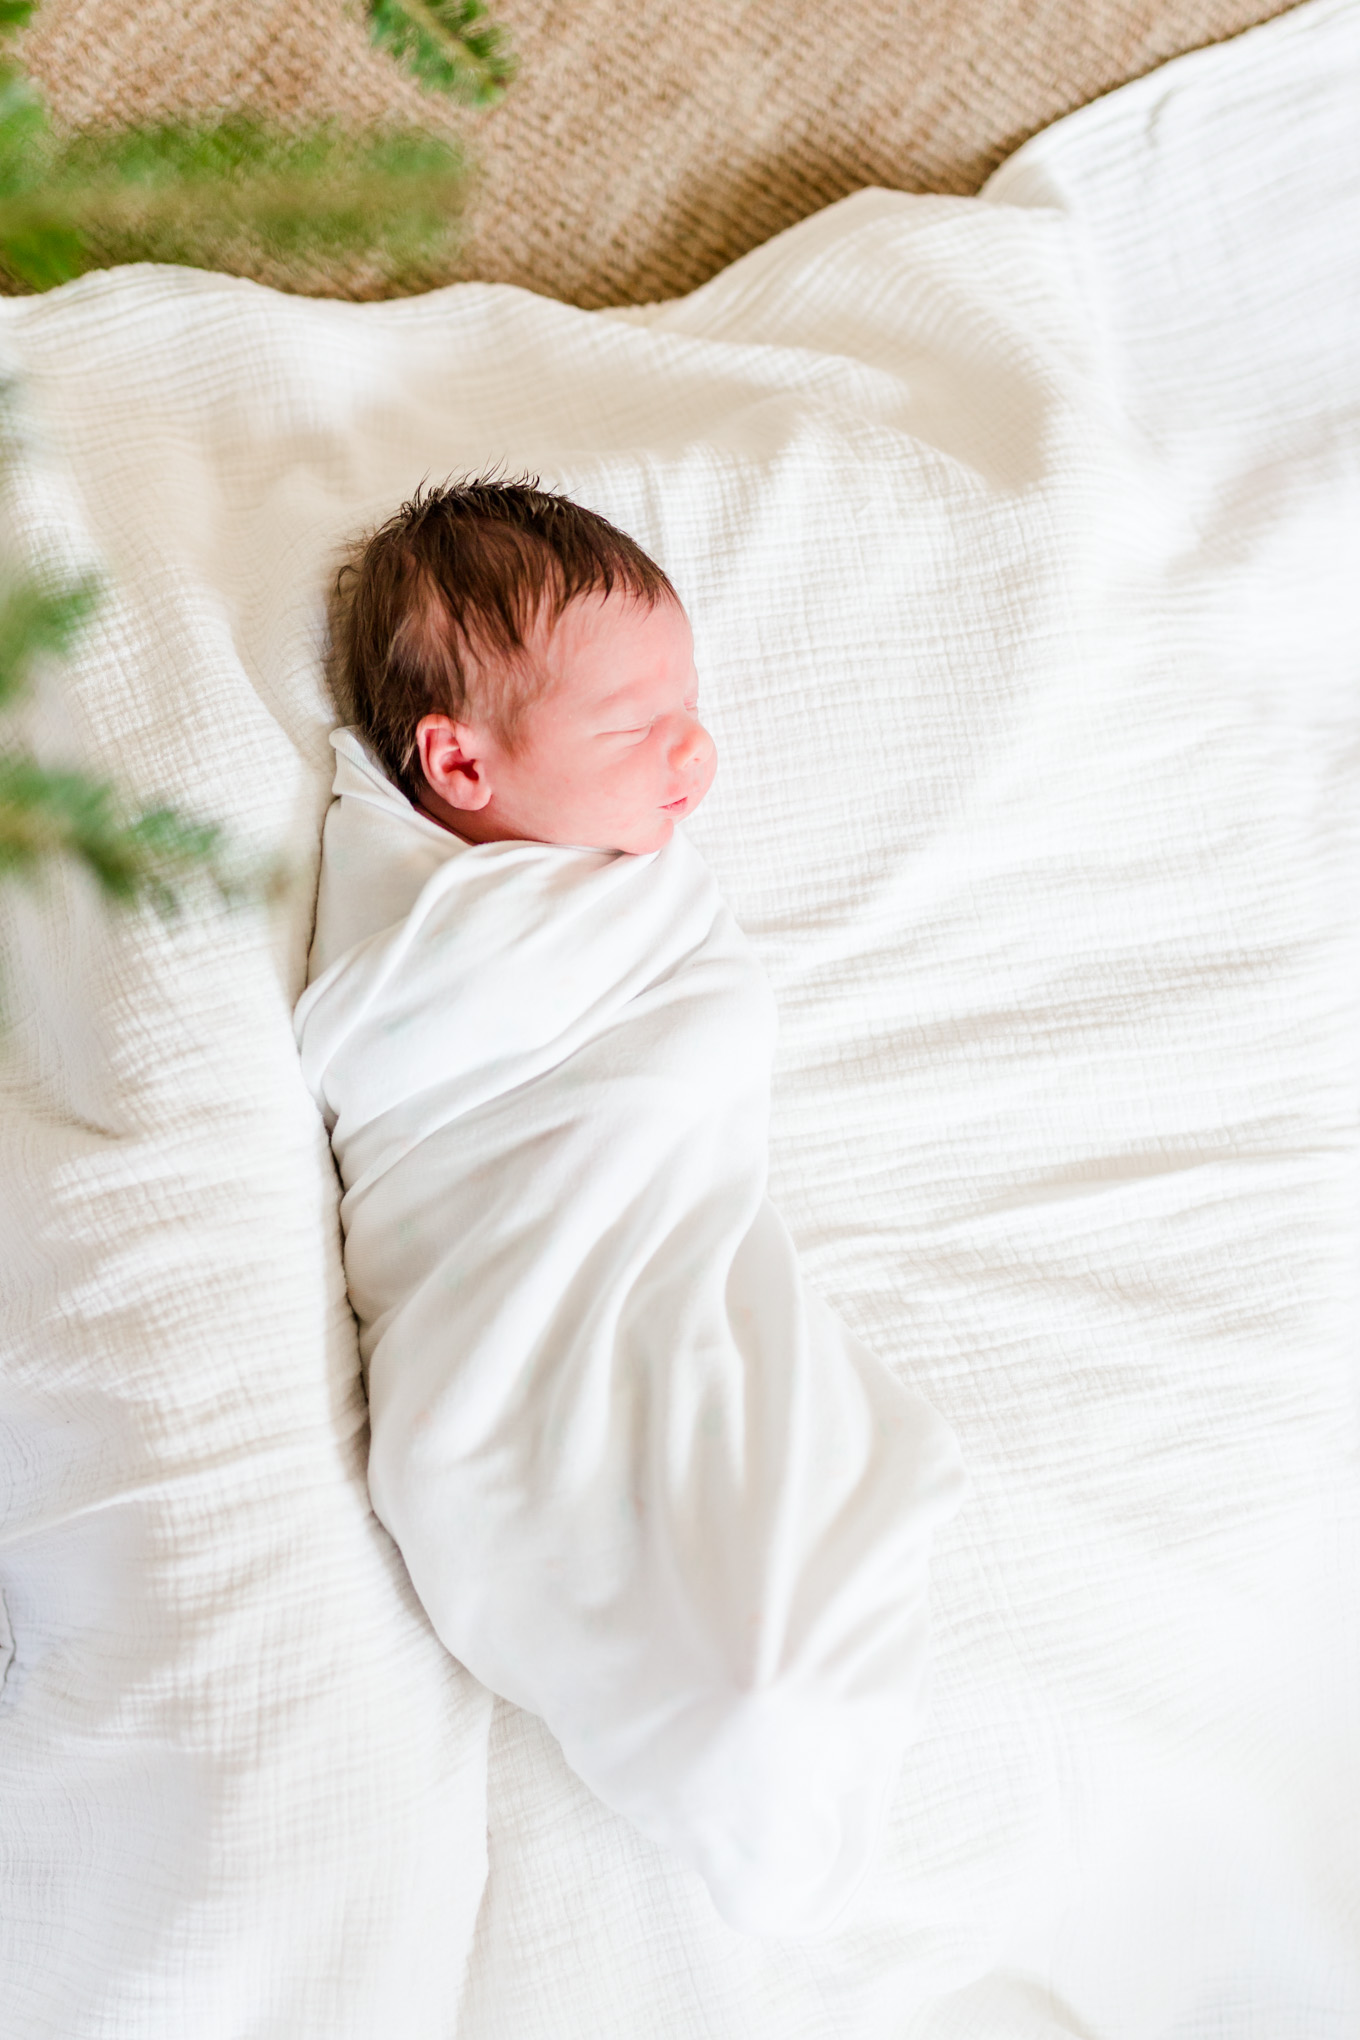 holiday newborn photos, newborn boy, baby boy, holiday photos, Christmas baby, brown haired baby, swaddled baby, Christmas tree